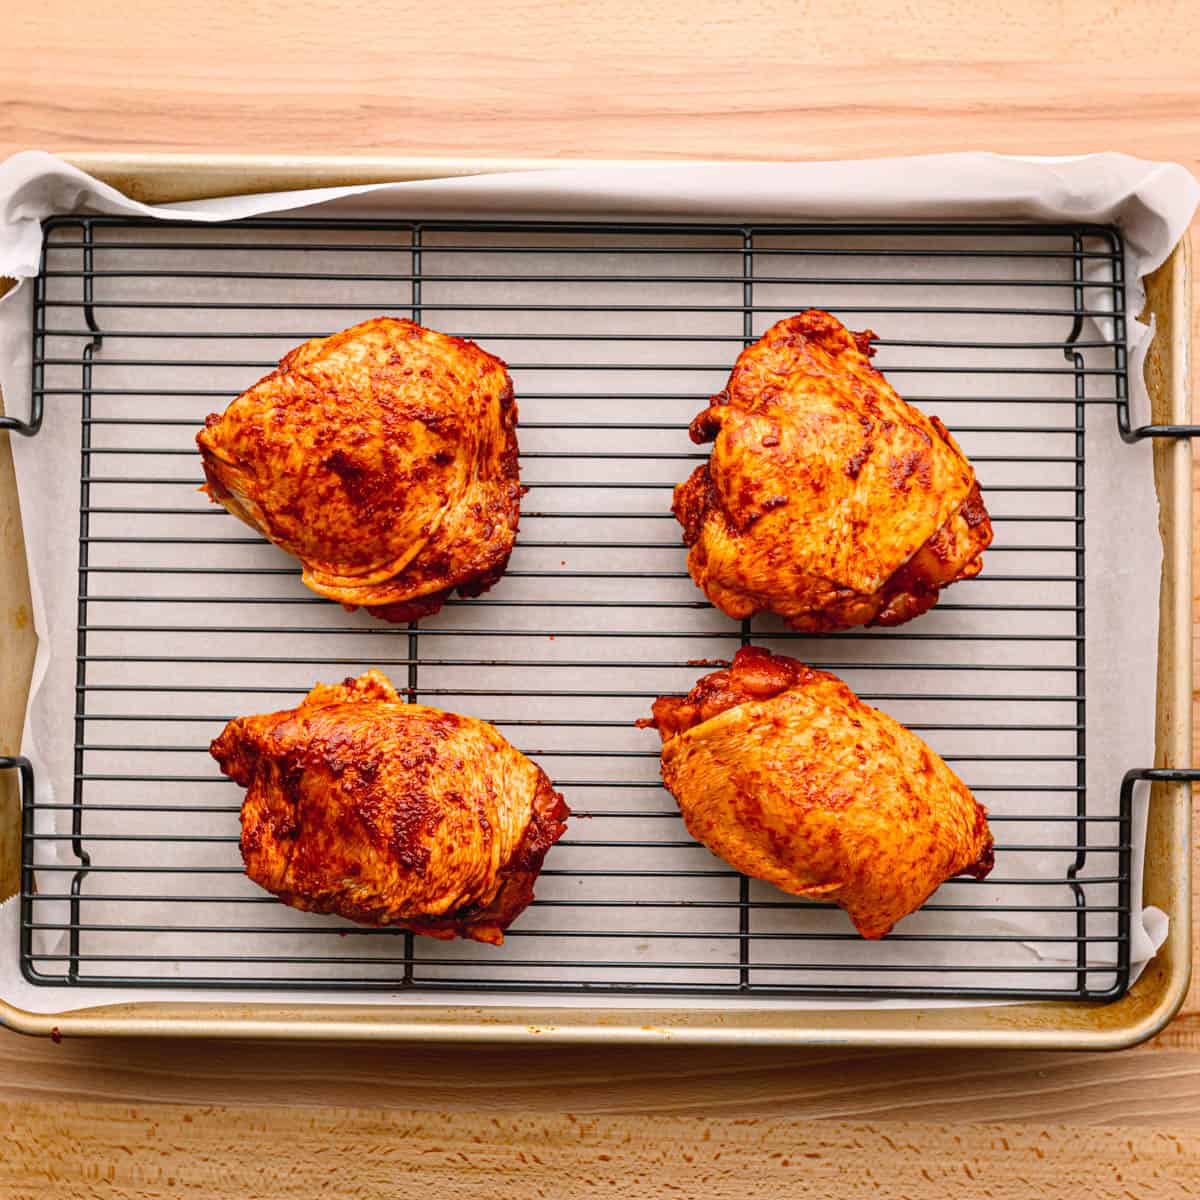 Line a baking sheet with parchment paper or foil for easy cleanup. For even browning, place a wire rack on top of the baking sheet to elevate the chicken and allow air to circulate around it.